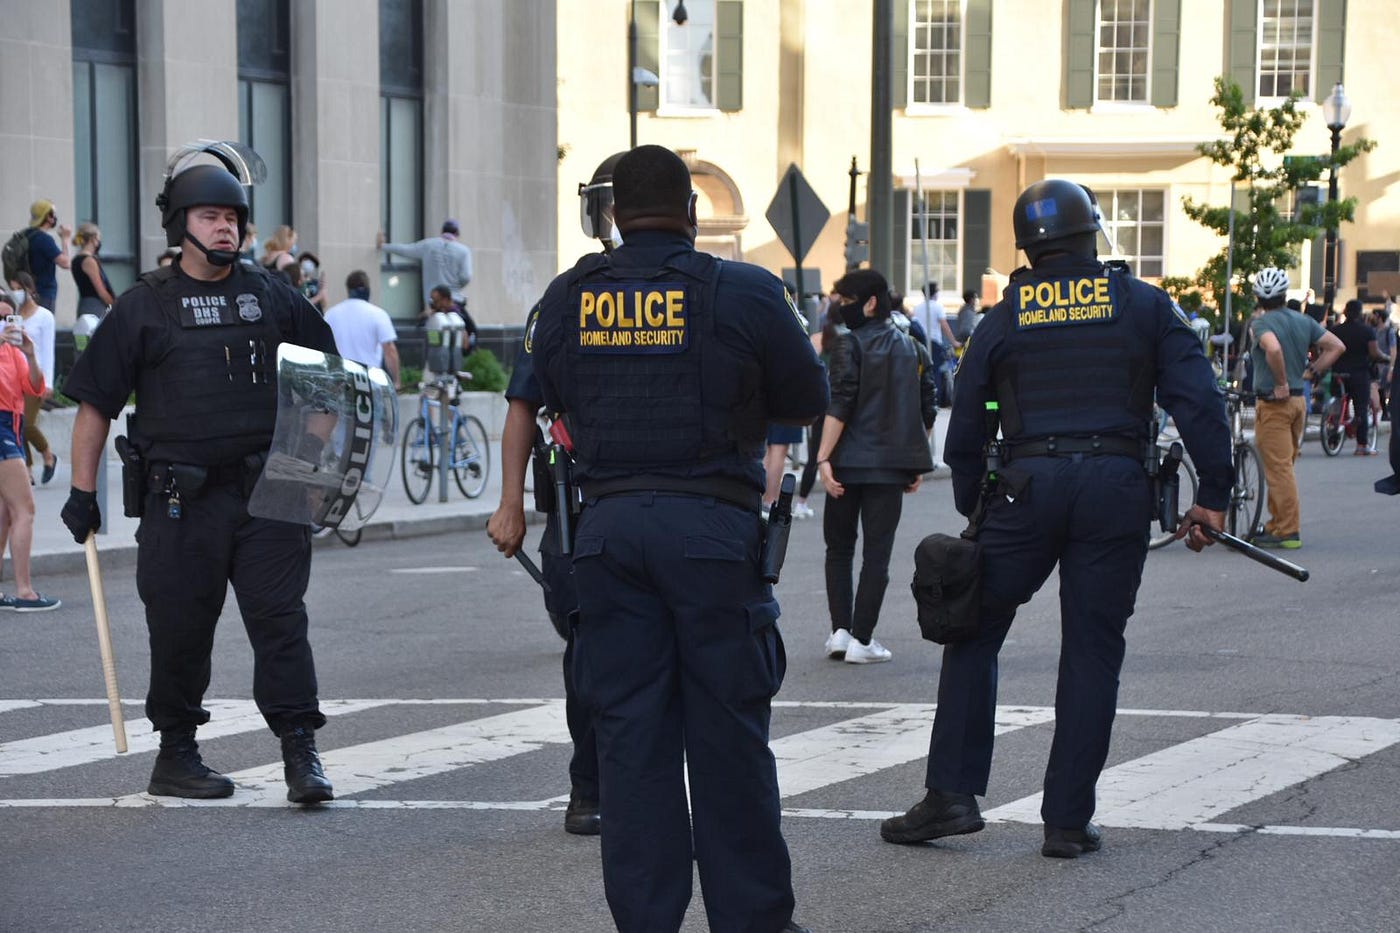 Police officers in helmets holding batons and shields on 16th Street in Washington D.C.